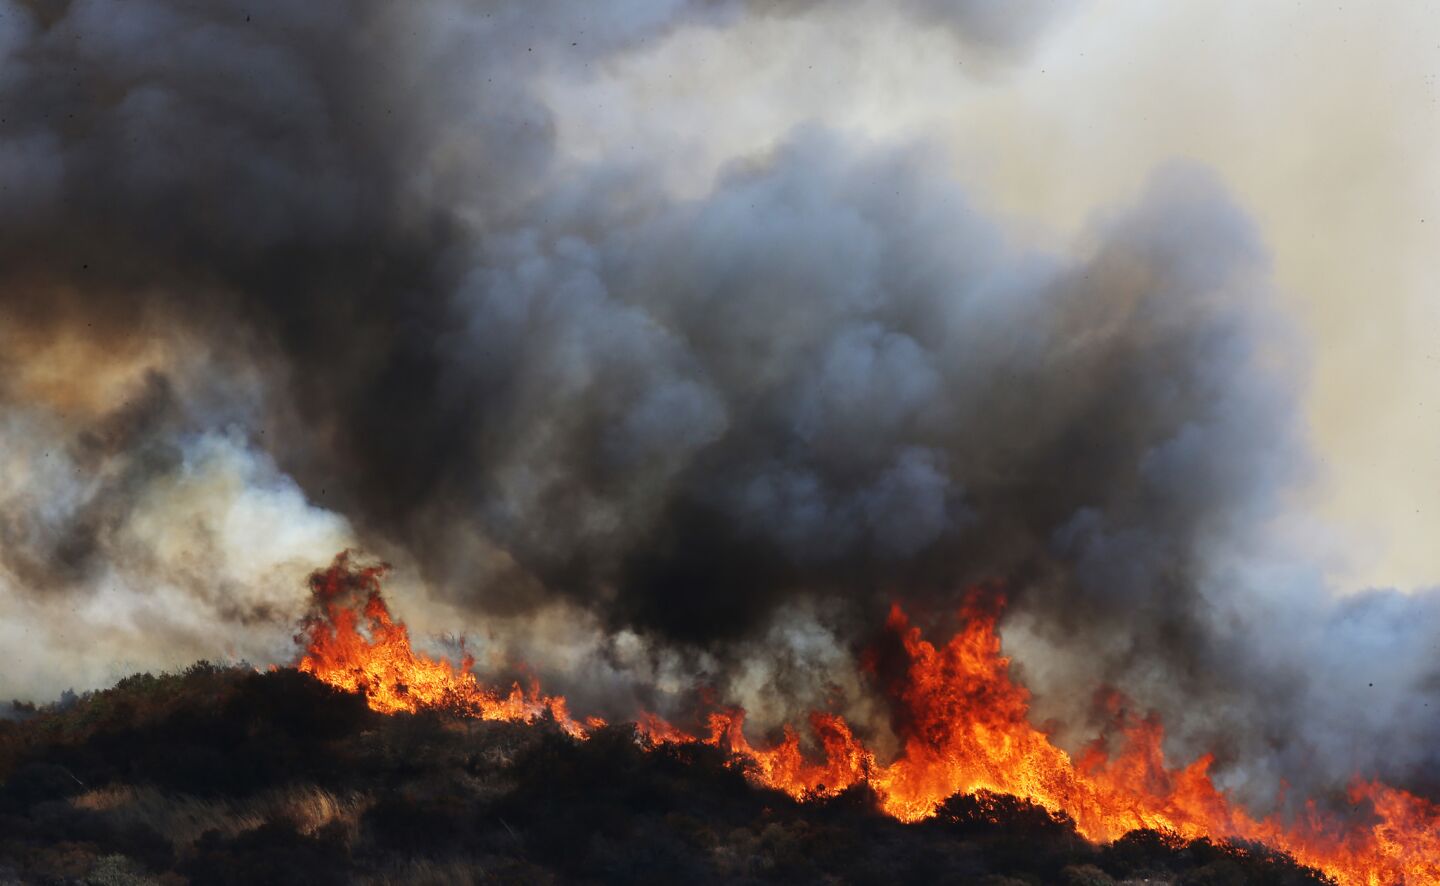 Towering flames of the Blue Cut fire burn out of control in the foothills of the San Bernardino National Forest above Lytle Creek.